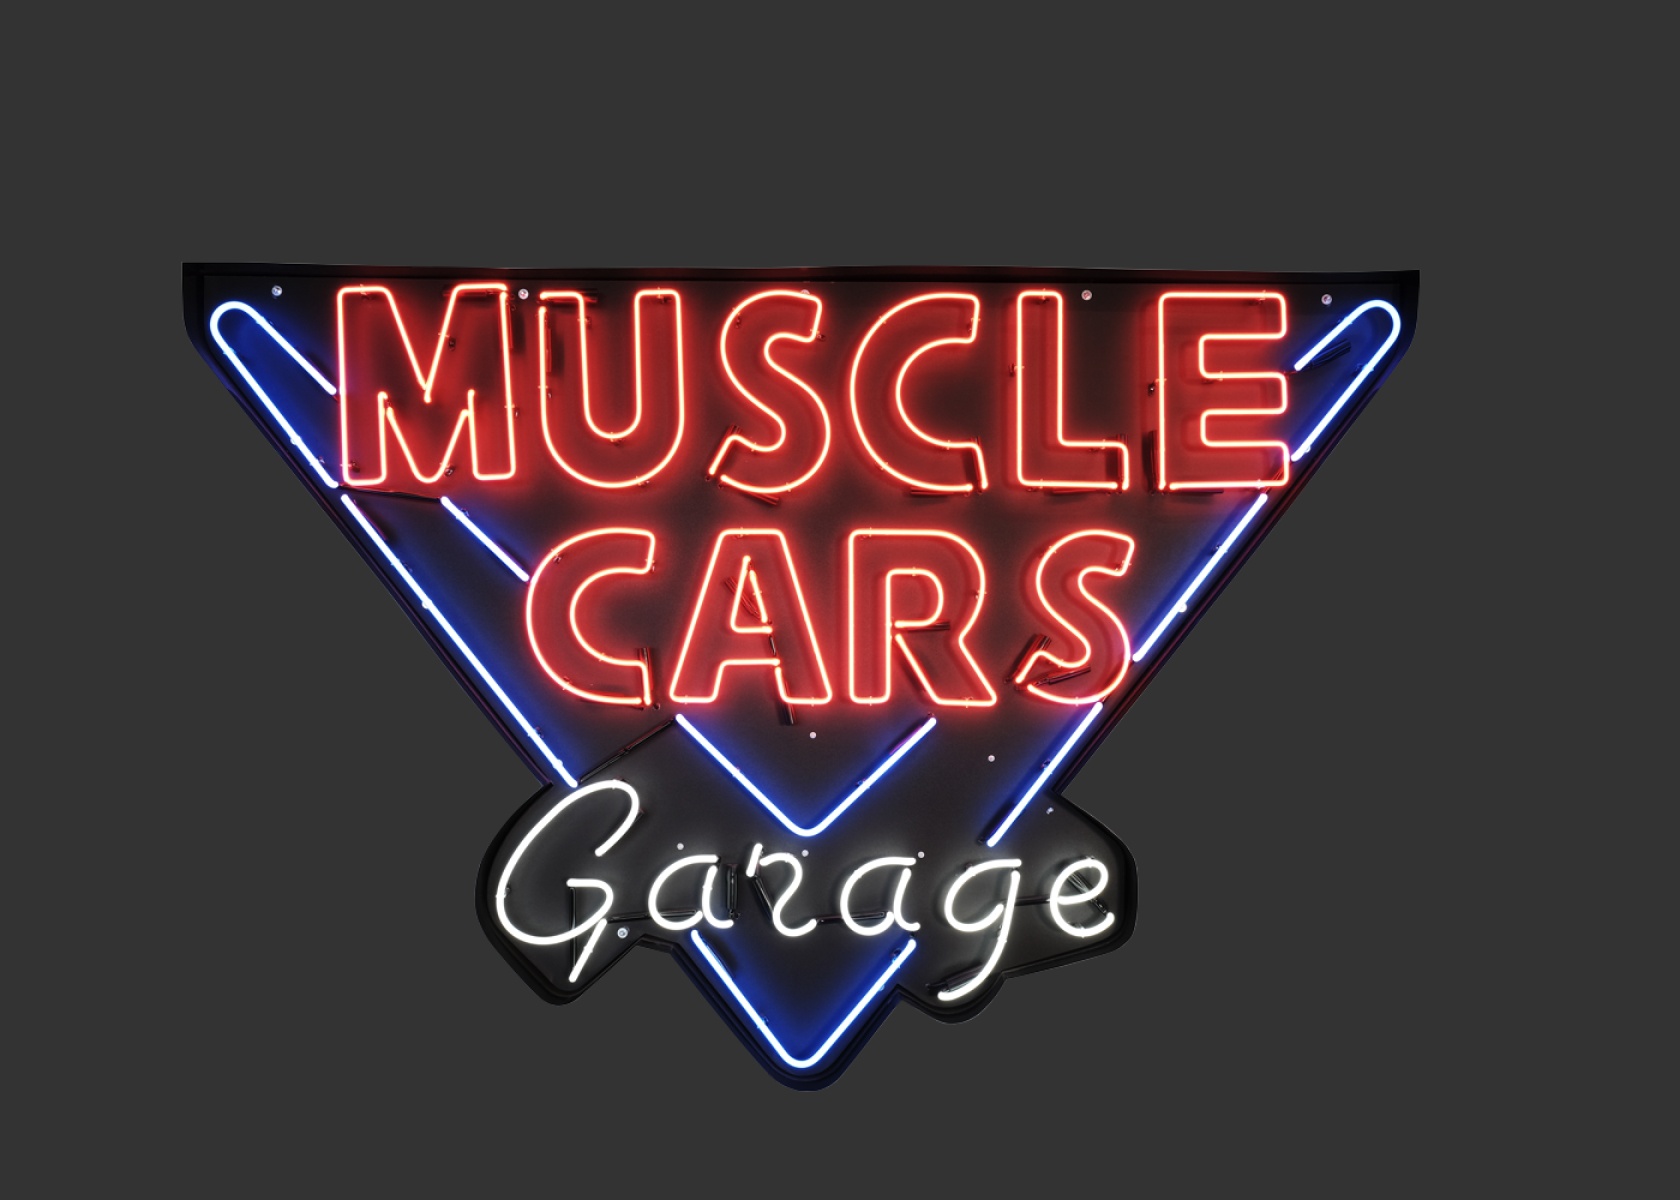 Muscle Cars Garage neon sign